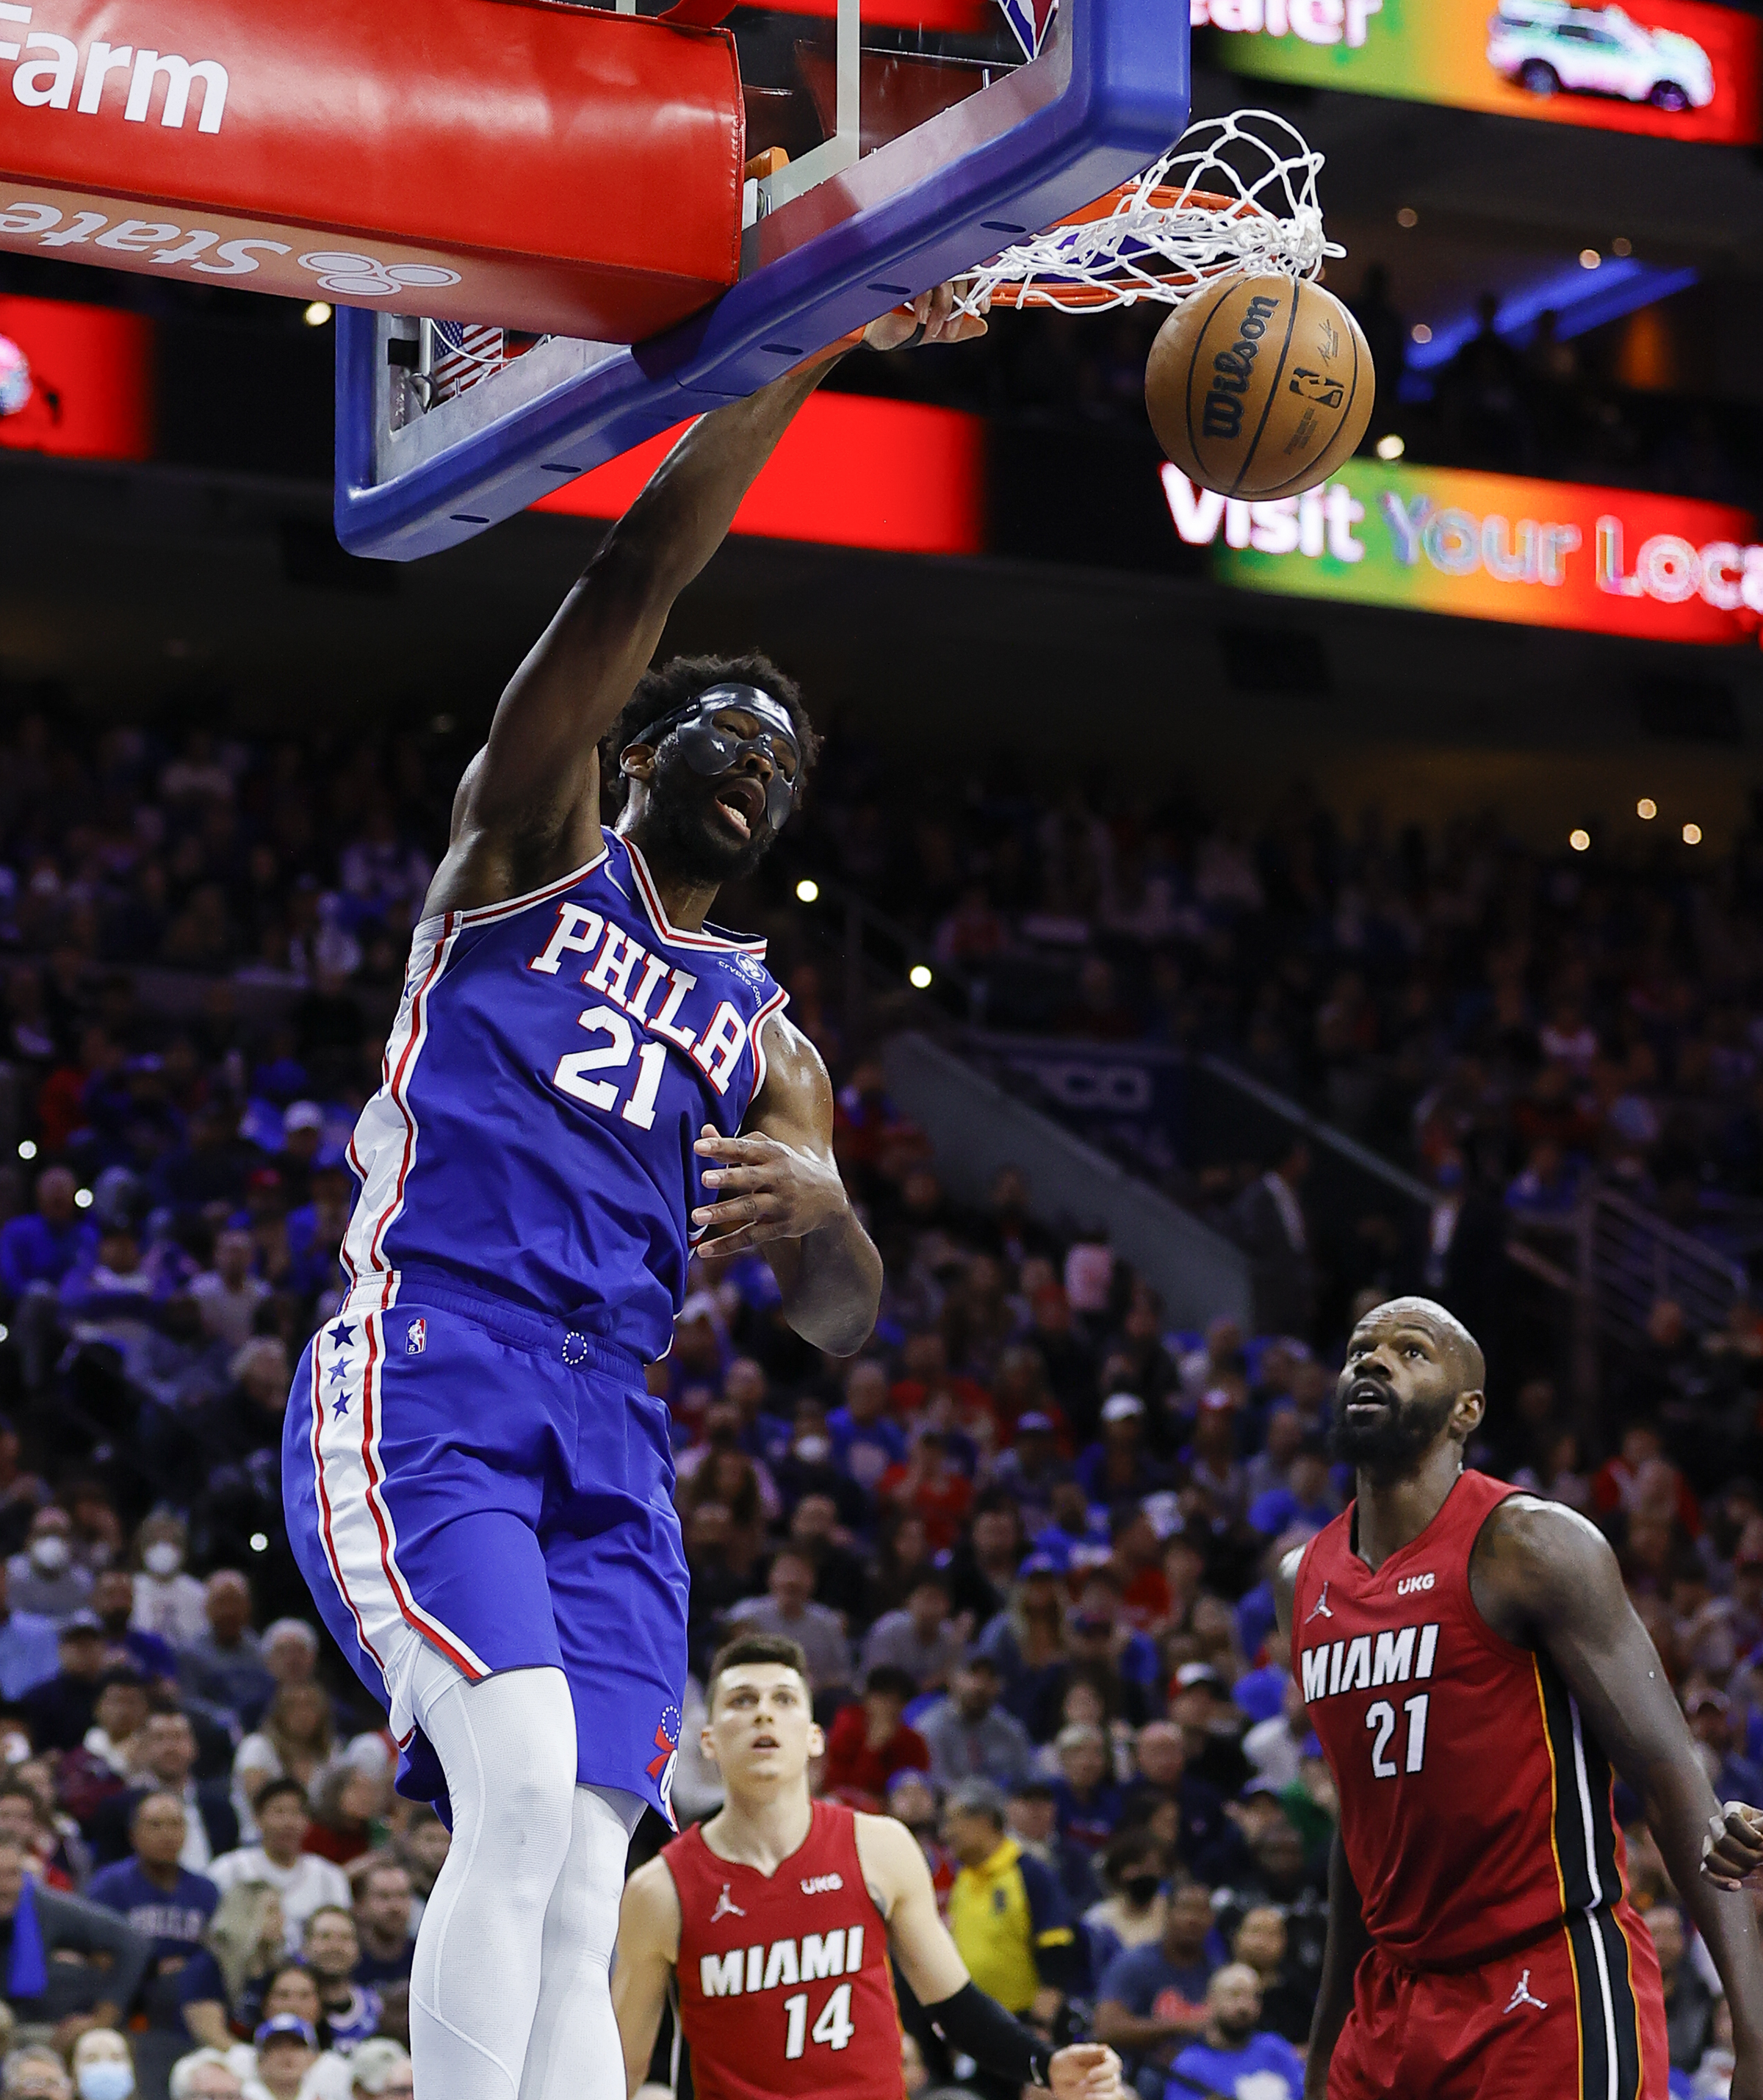 It's whatever': Joel Embiid brushes off wearing protective mask during  Sixers' Game 3 win over Miami Heat in NBA playoffs